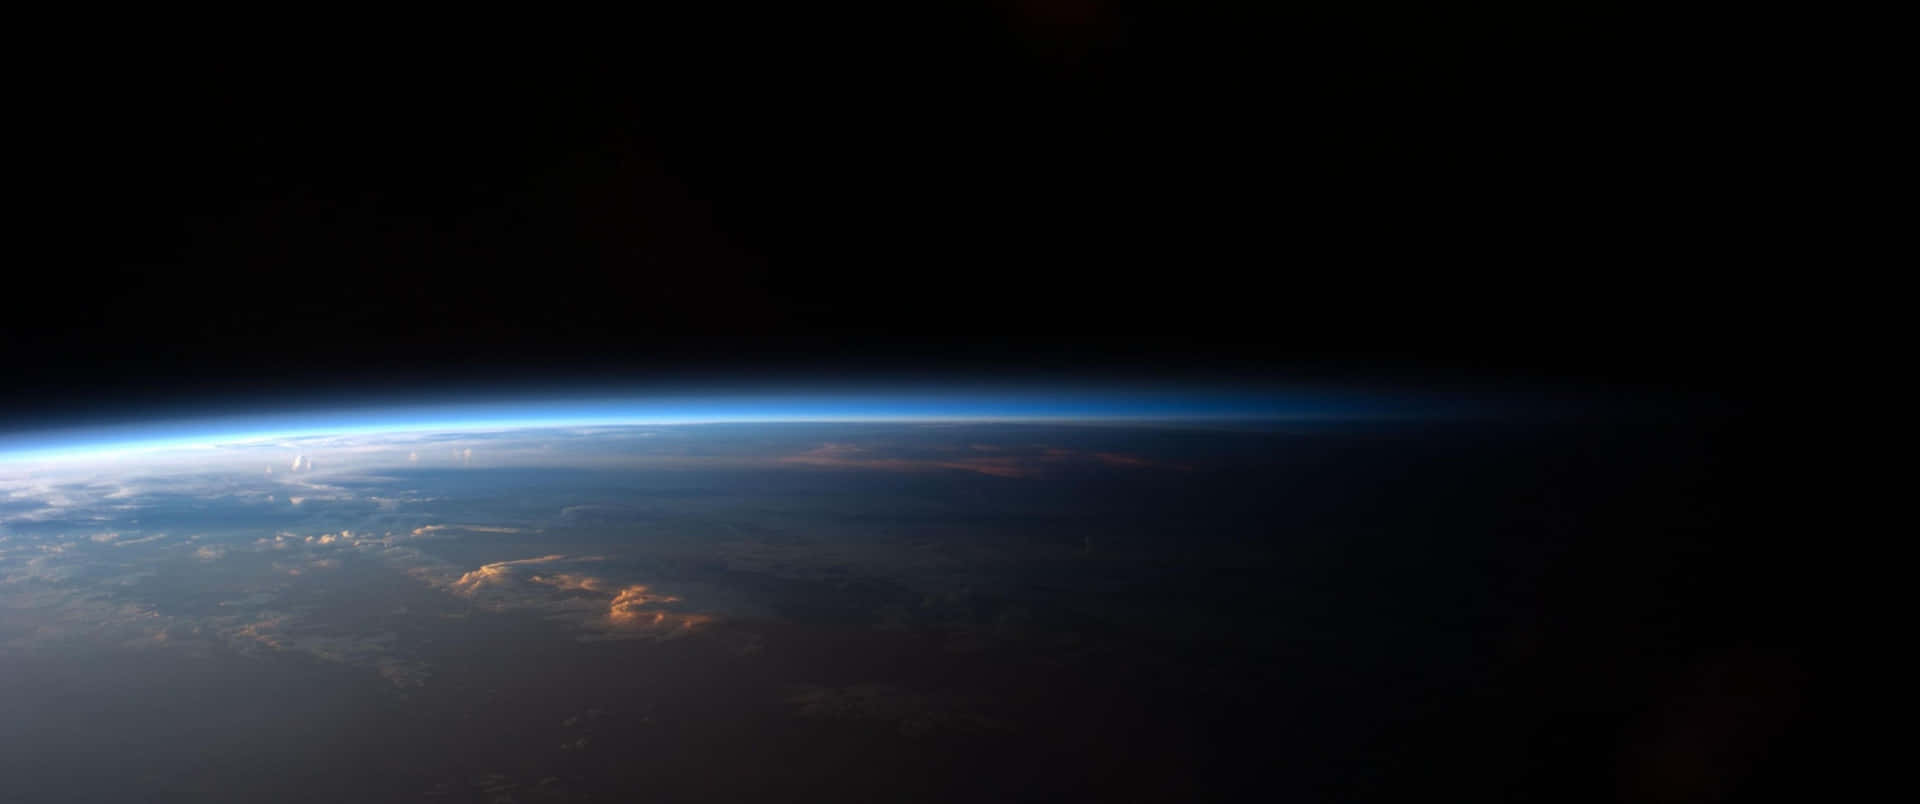 3440x1440 Space Of Earth's Atmosphere Wallpaper